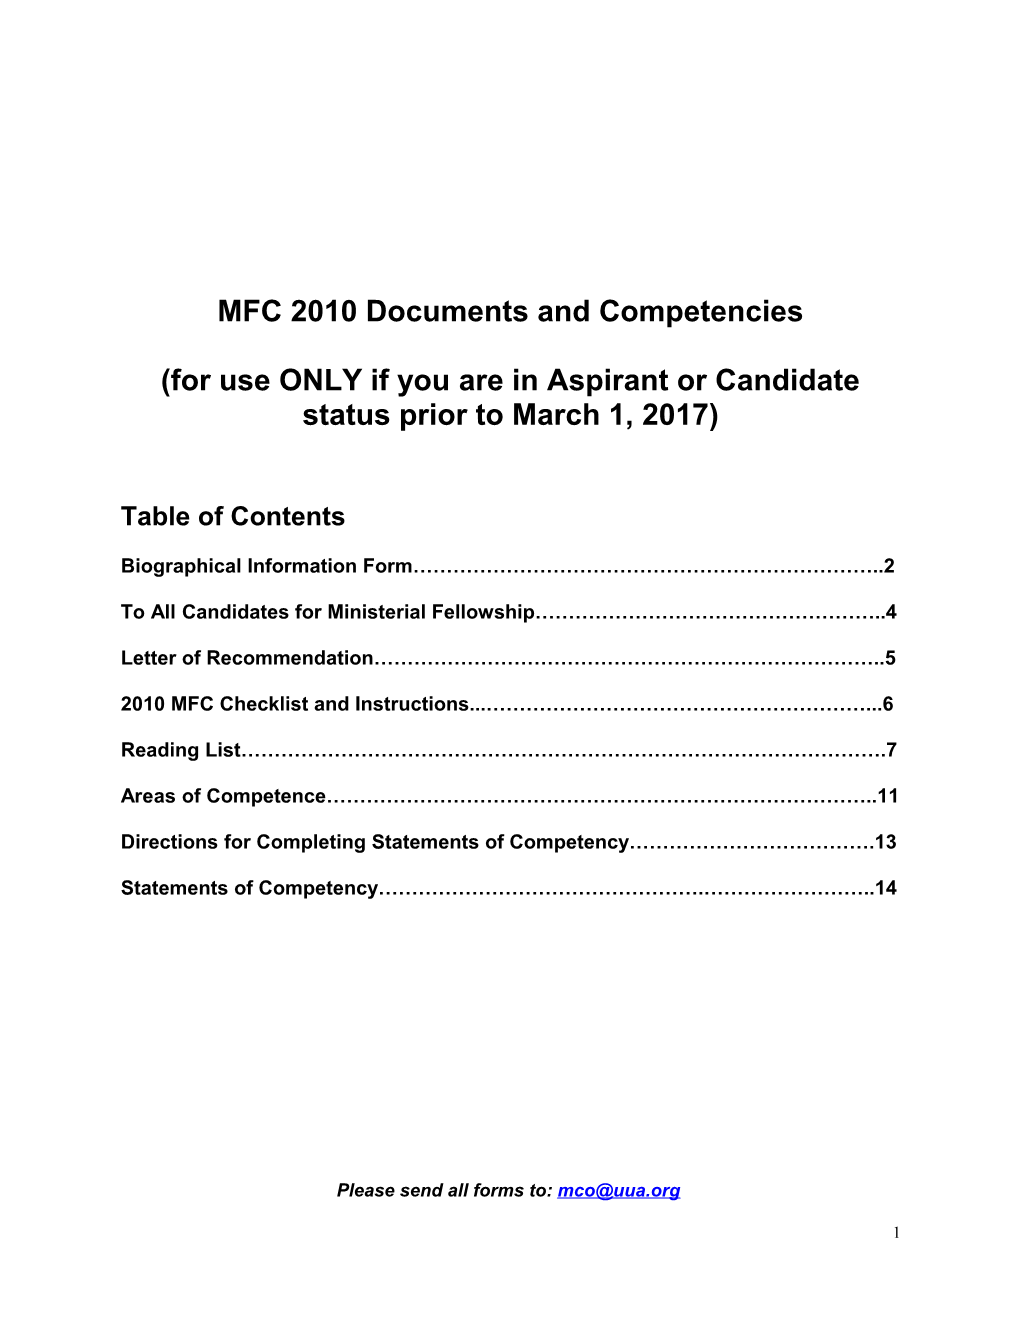 MFC 2010 Documents and Competencies